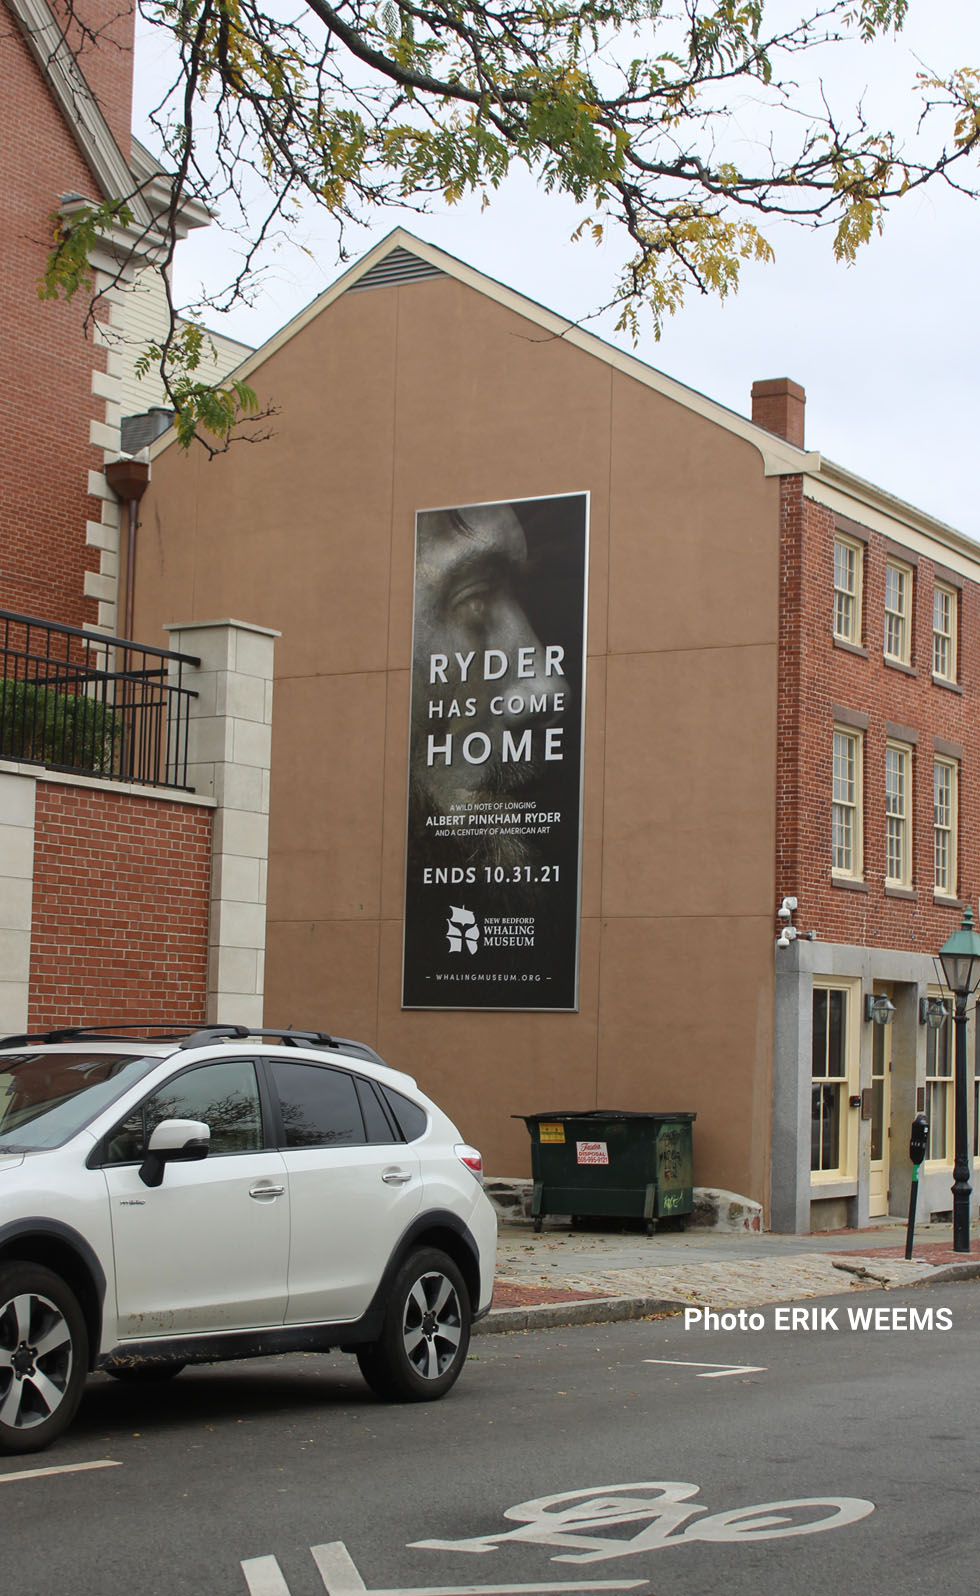 Ryder ha scome home - in New Bedford Mass